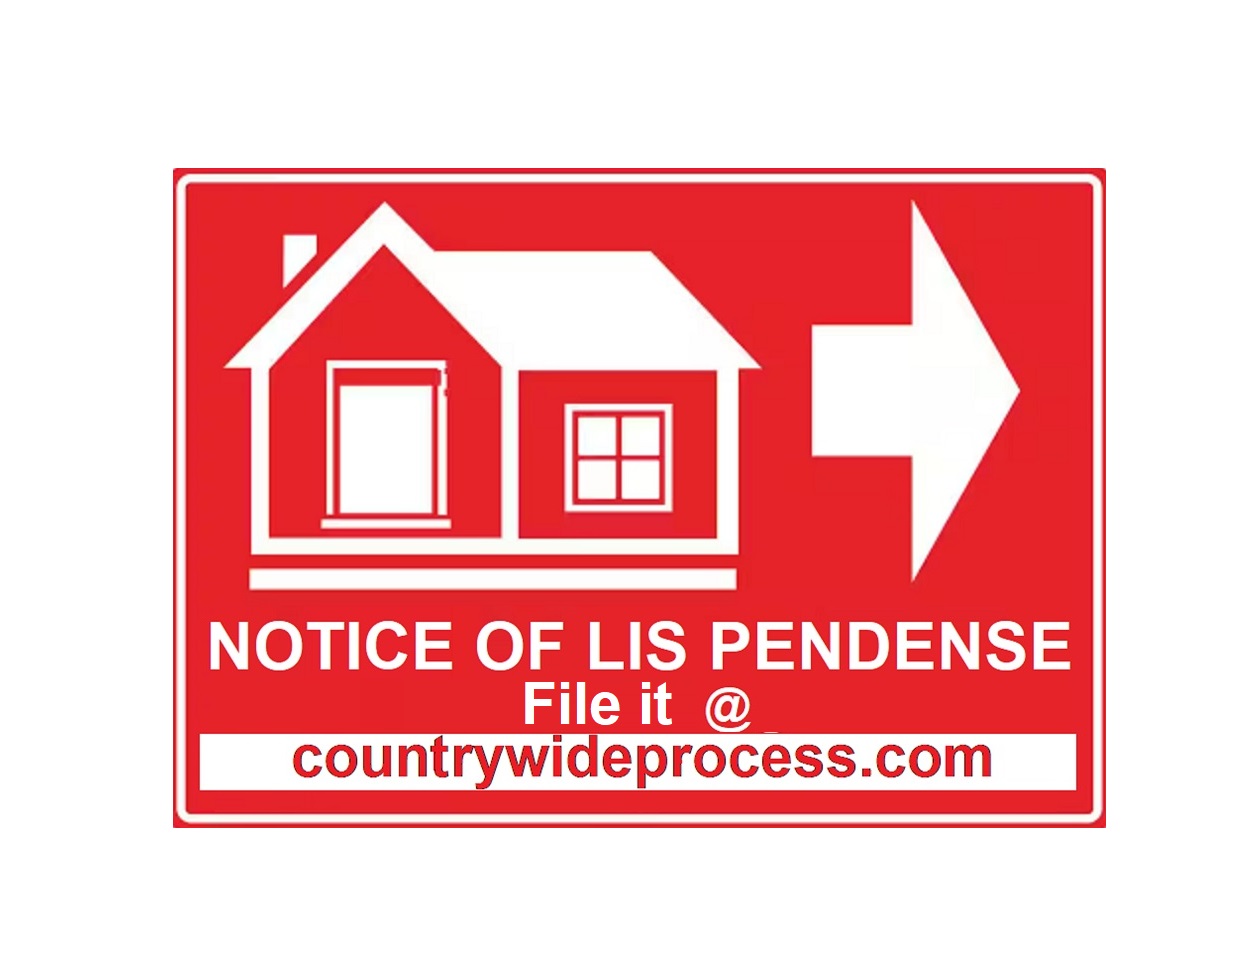 HOW TO FILE NOTICE OF LIS PENDENS IN CALIFORNIA